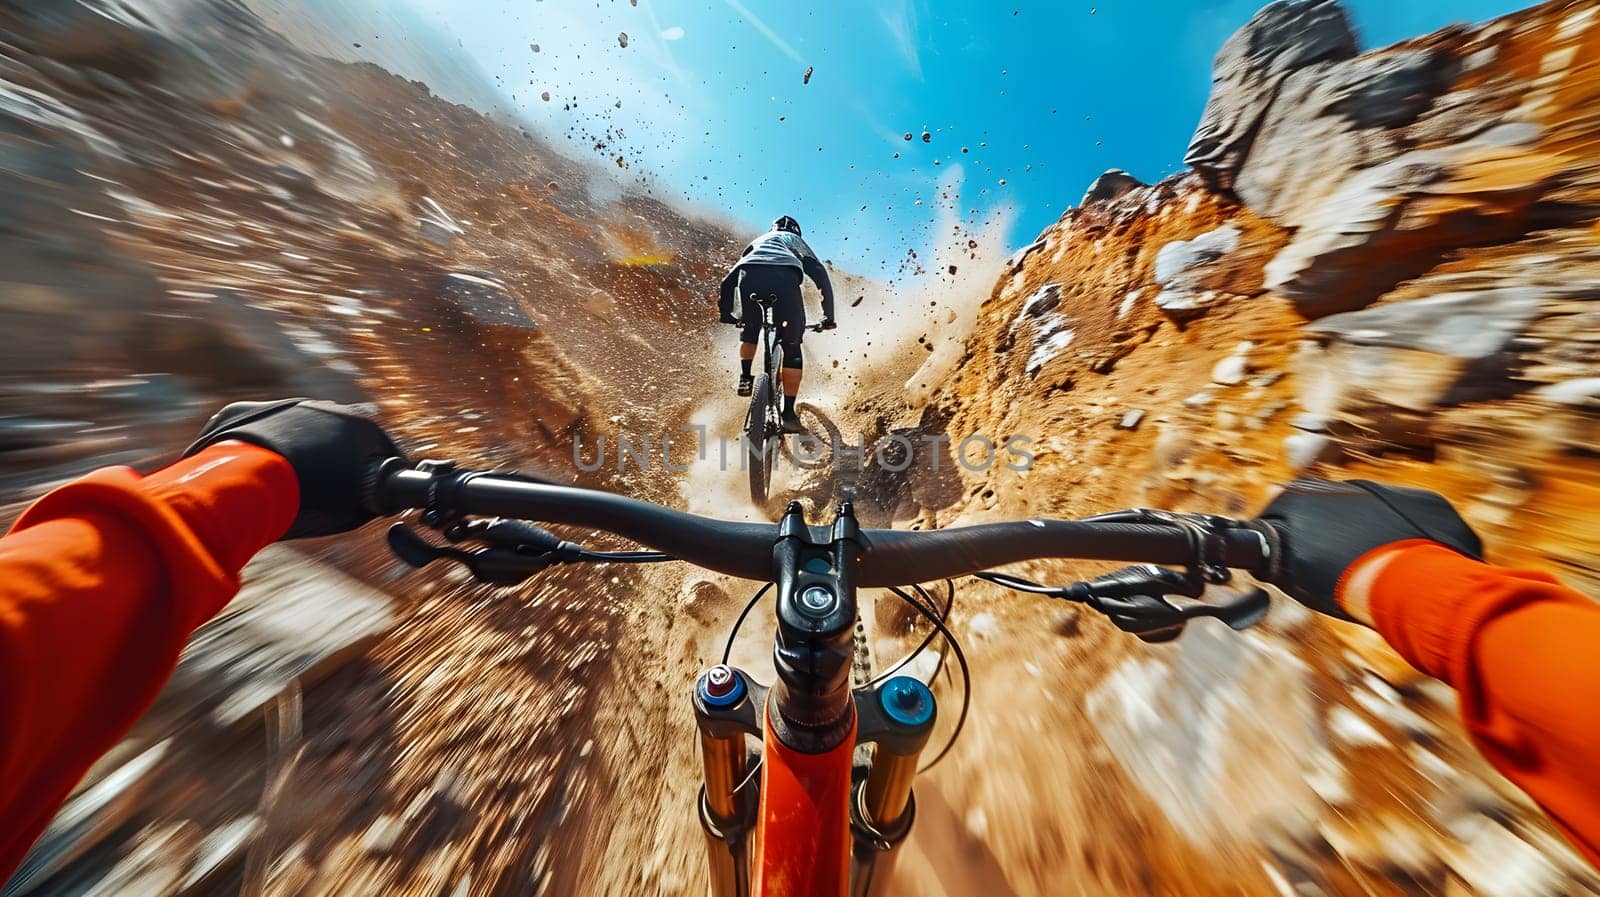 Enjoying a thrilling adventure, a person rides their mountain bike down a dusty dirt road under the vast sky with fluffy clouds, surrounded by breathtaking landscape